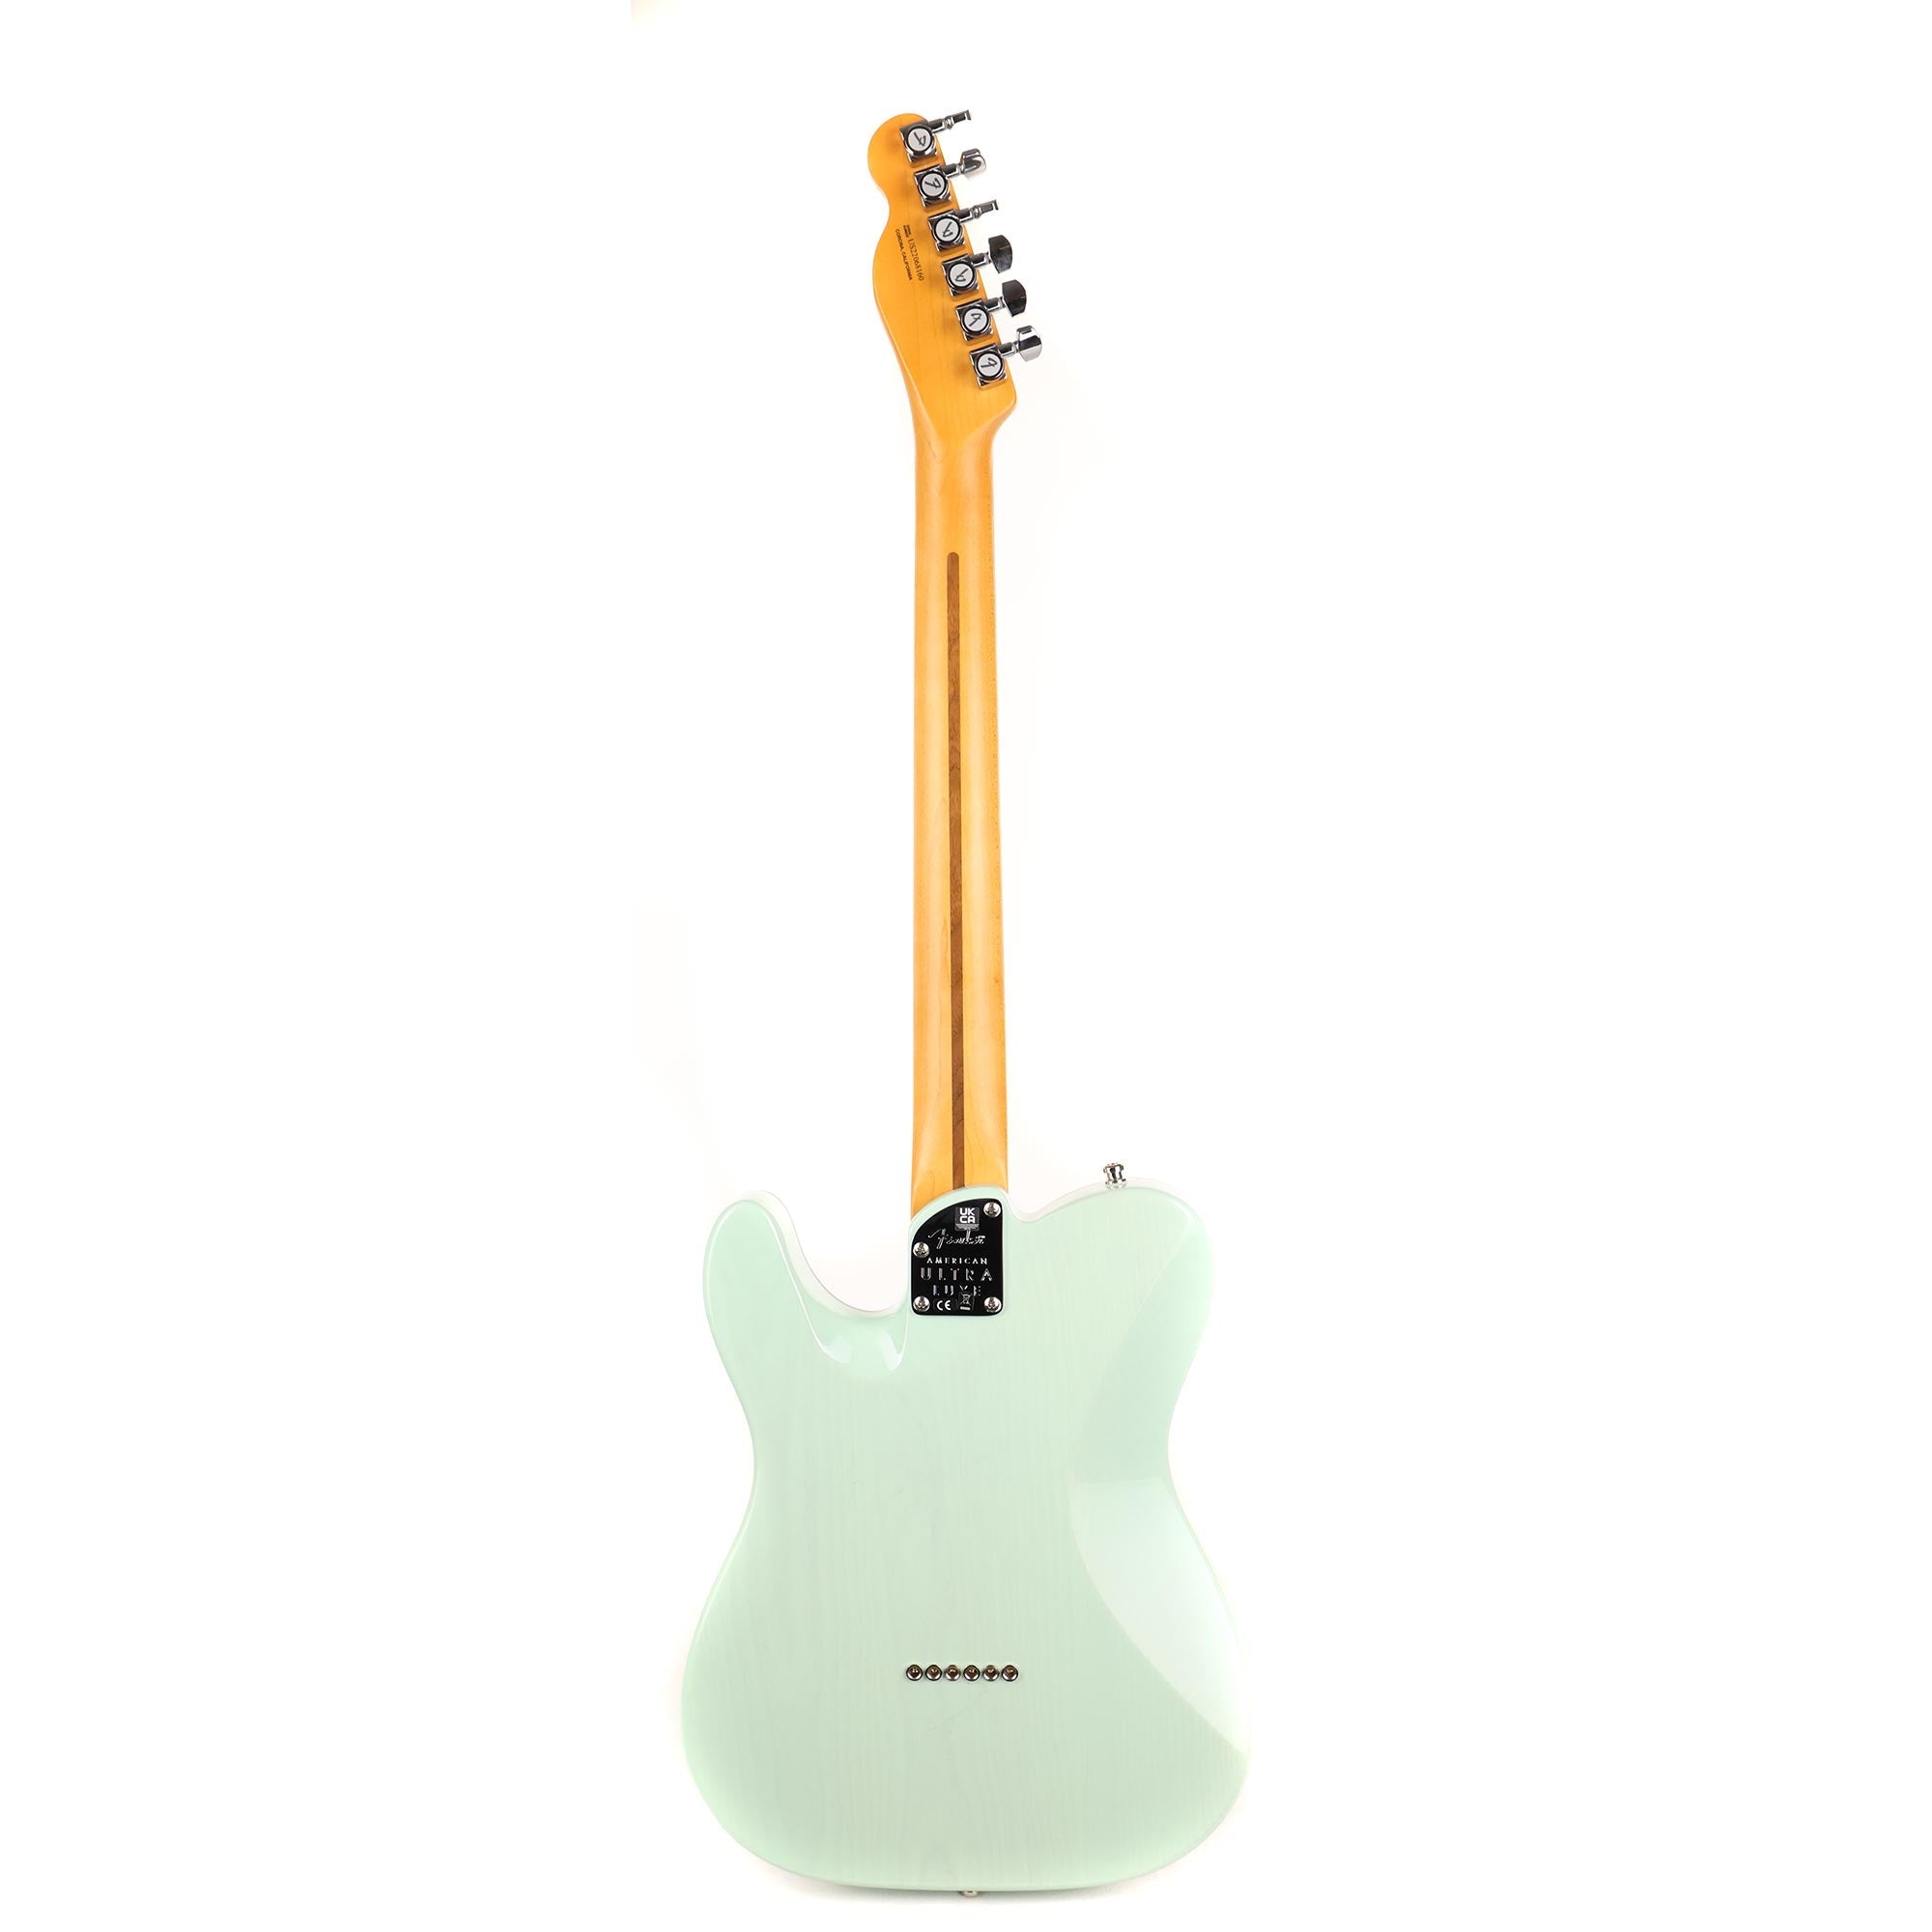 Fender Ultra Luxe Telecaster Rosewood, Transparent Surf Green